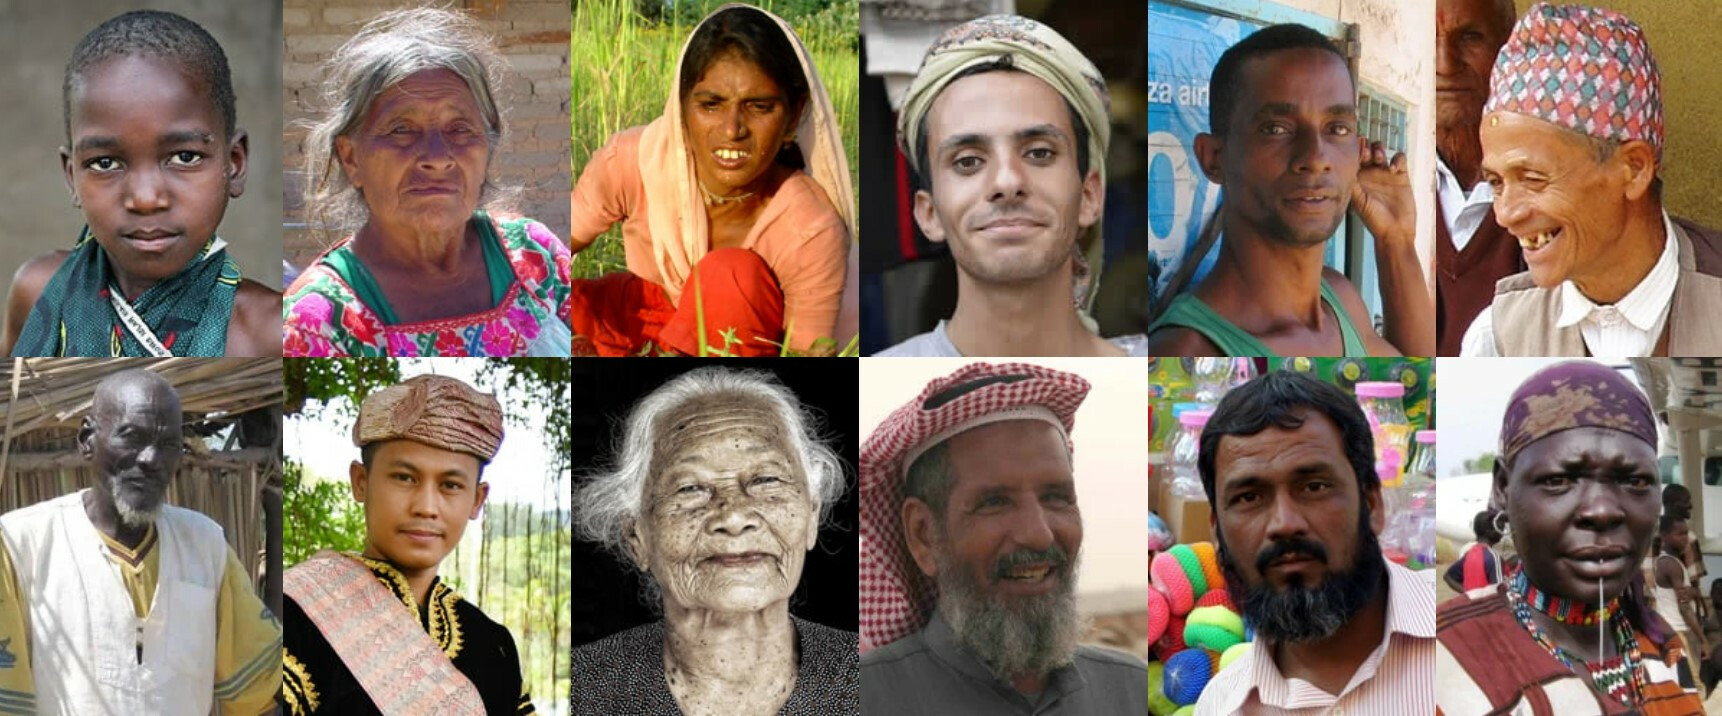 photo collage of unreached people groups